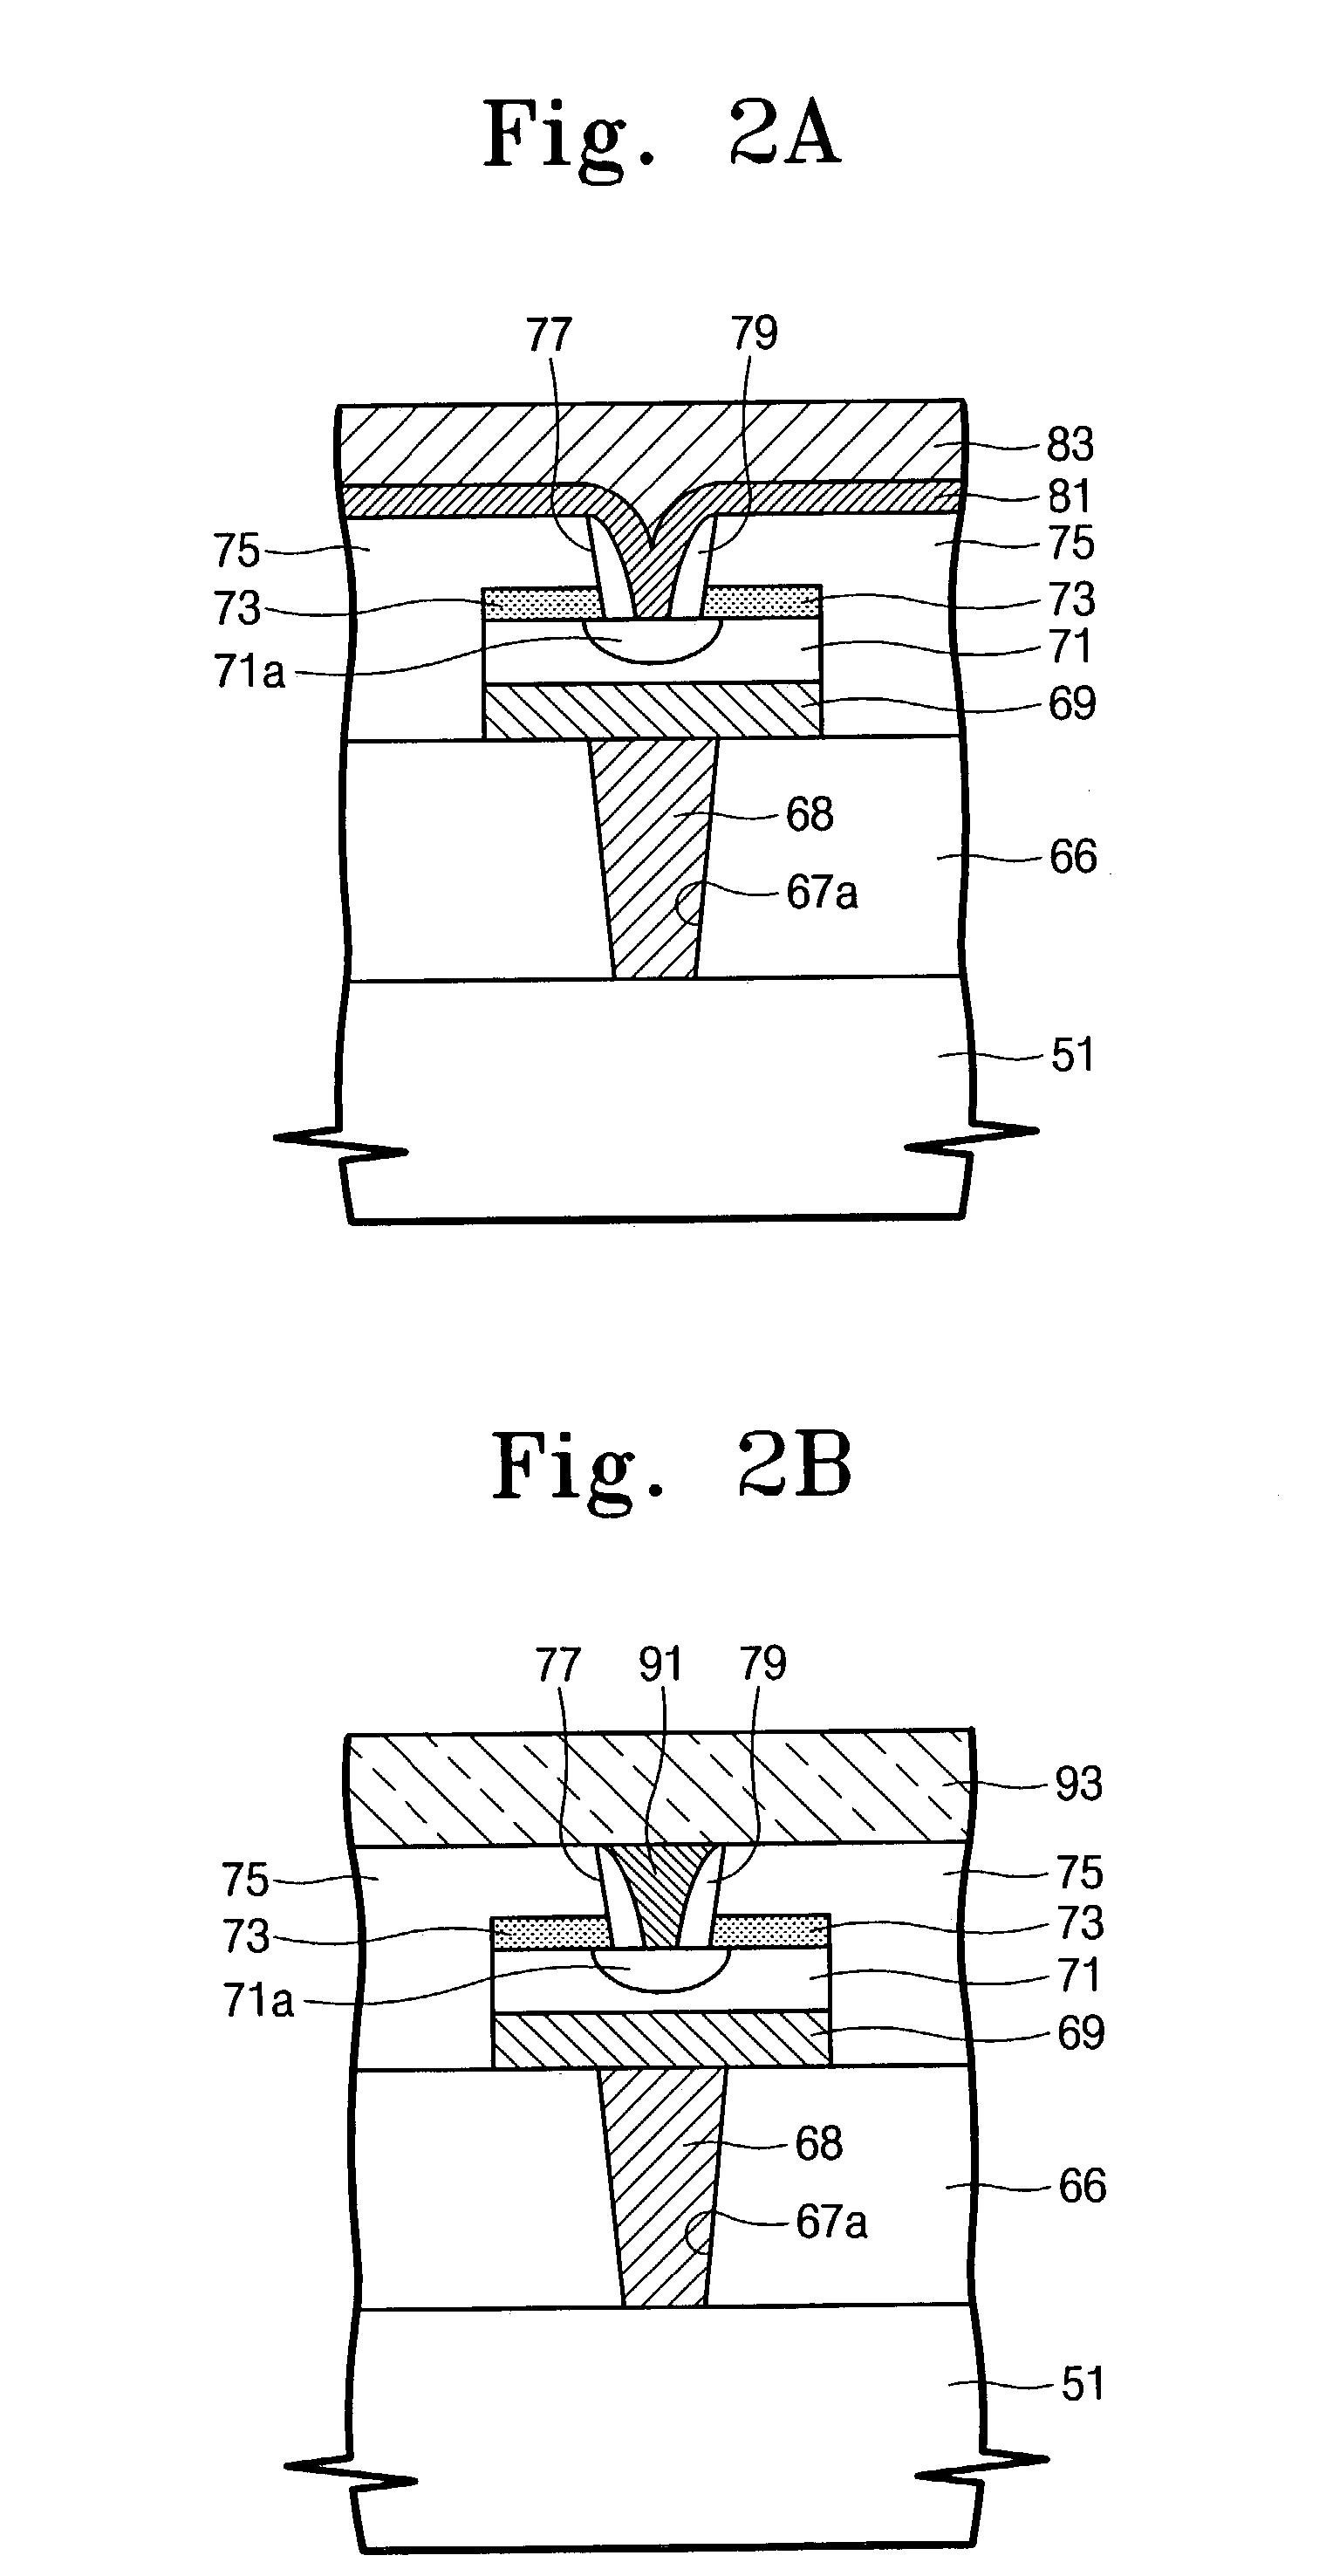 Integrated circuit memory devices having memory cells therein that utilize phase-change materials to support non-volatile data retention